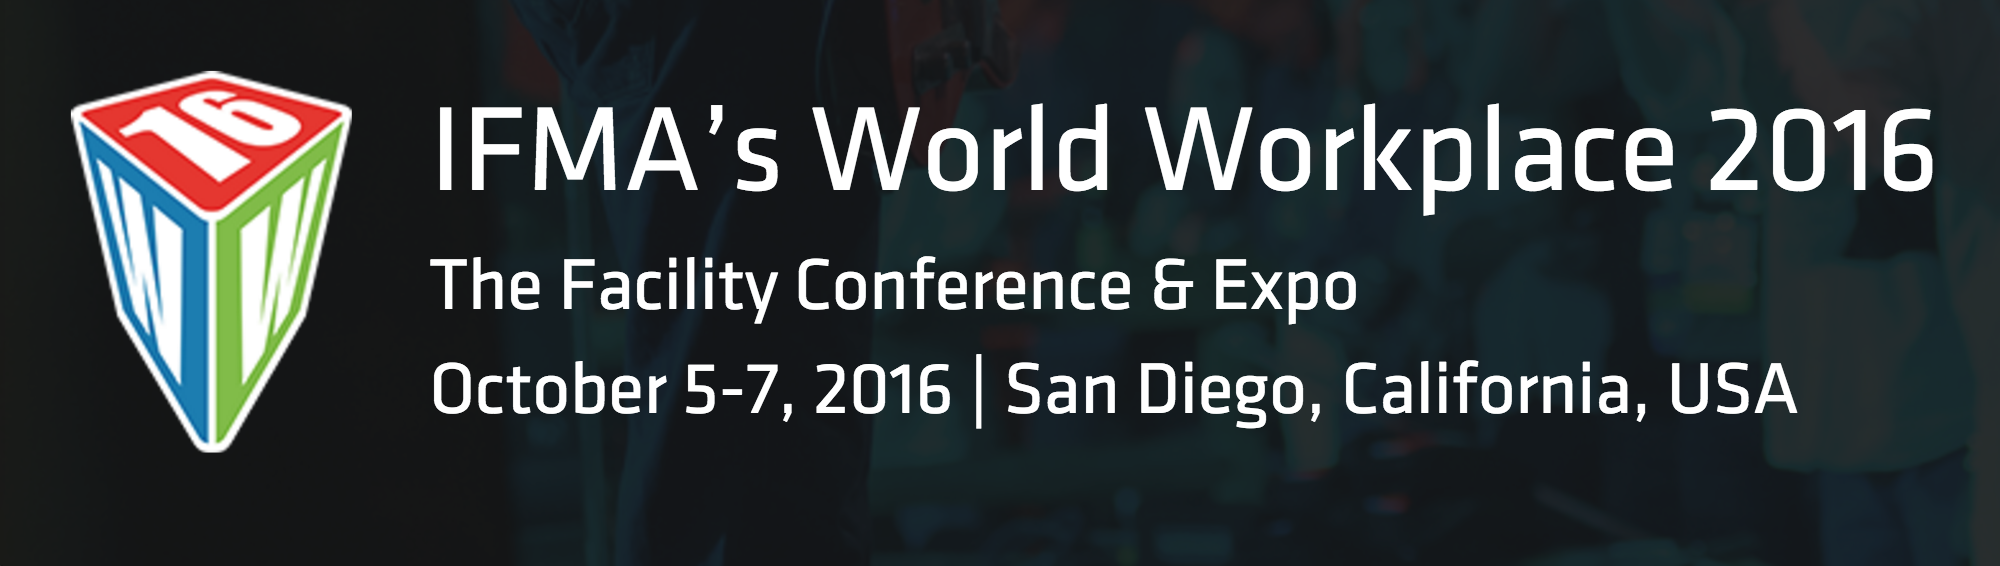 IFMA World Workplace Conference and Expo 2016 